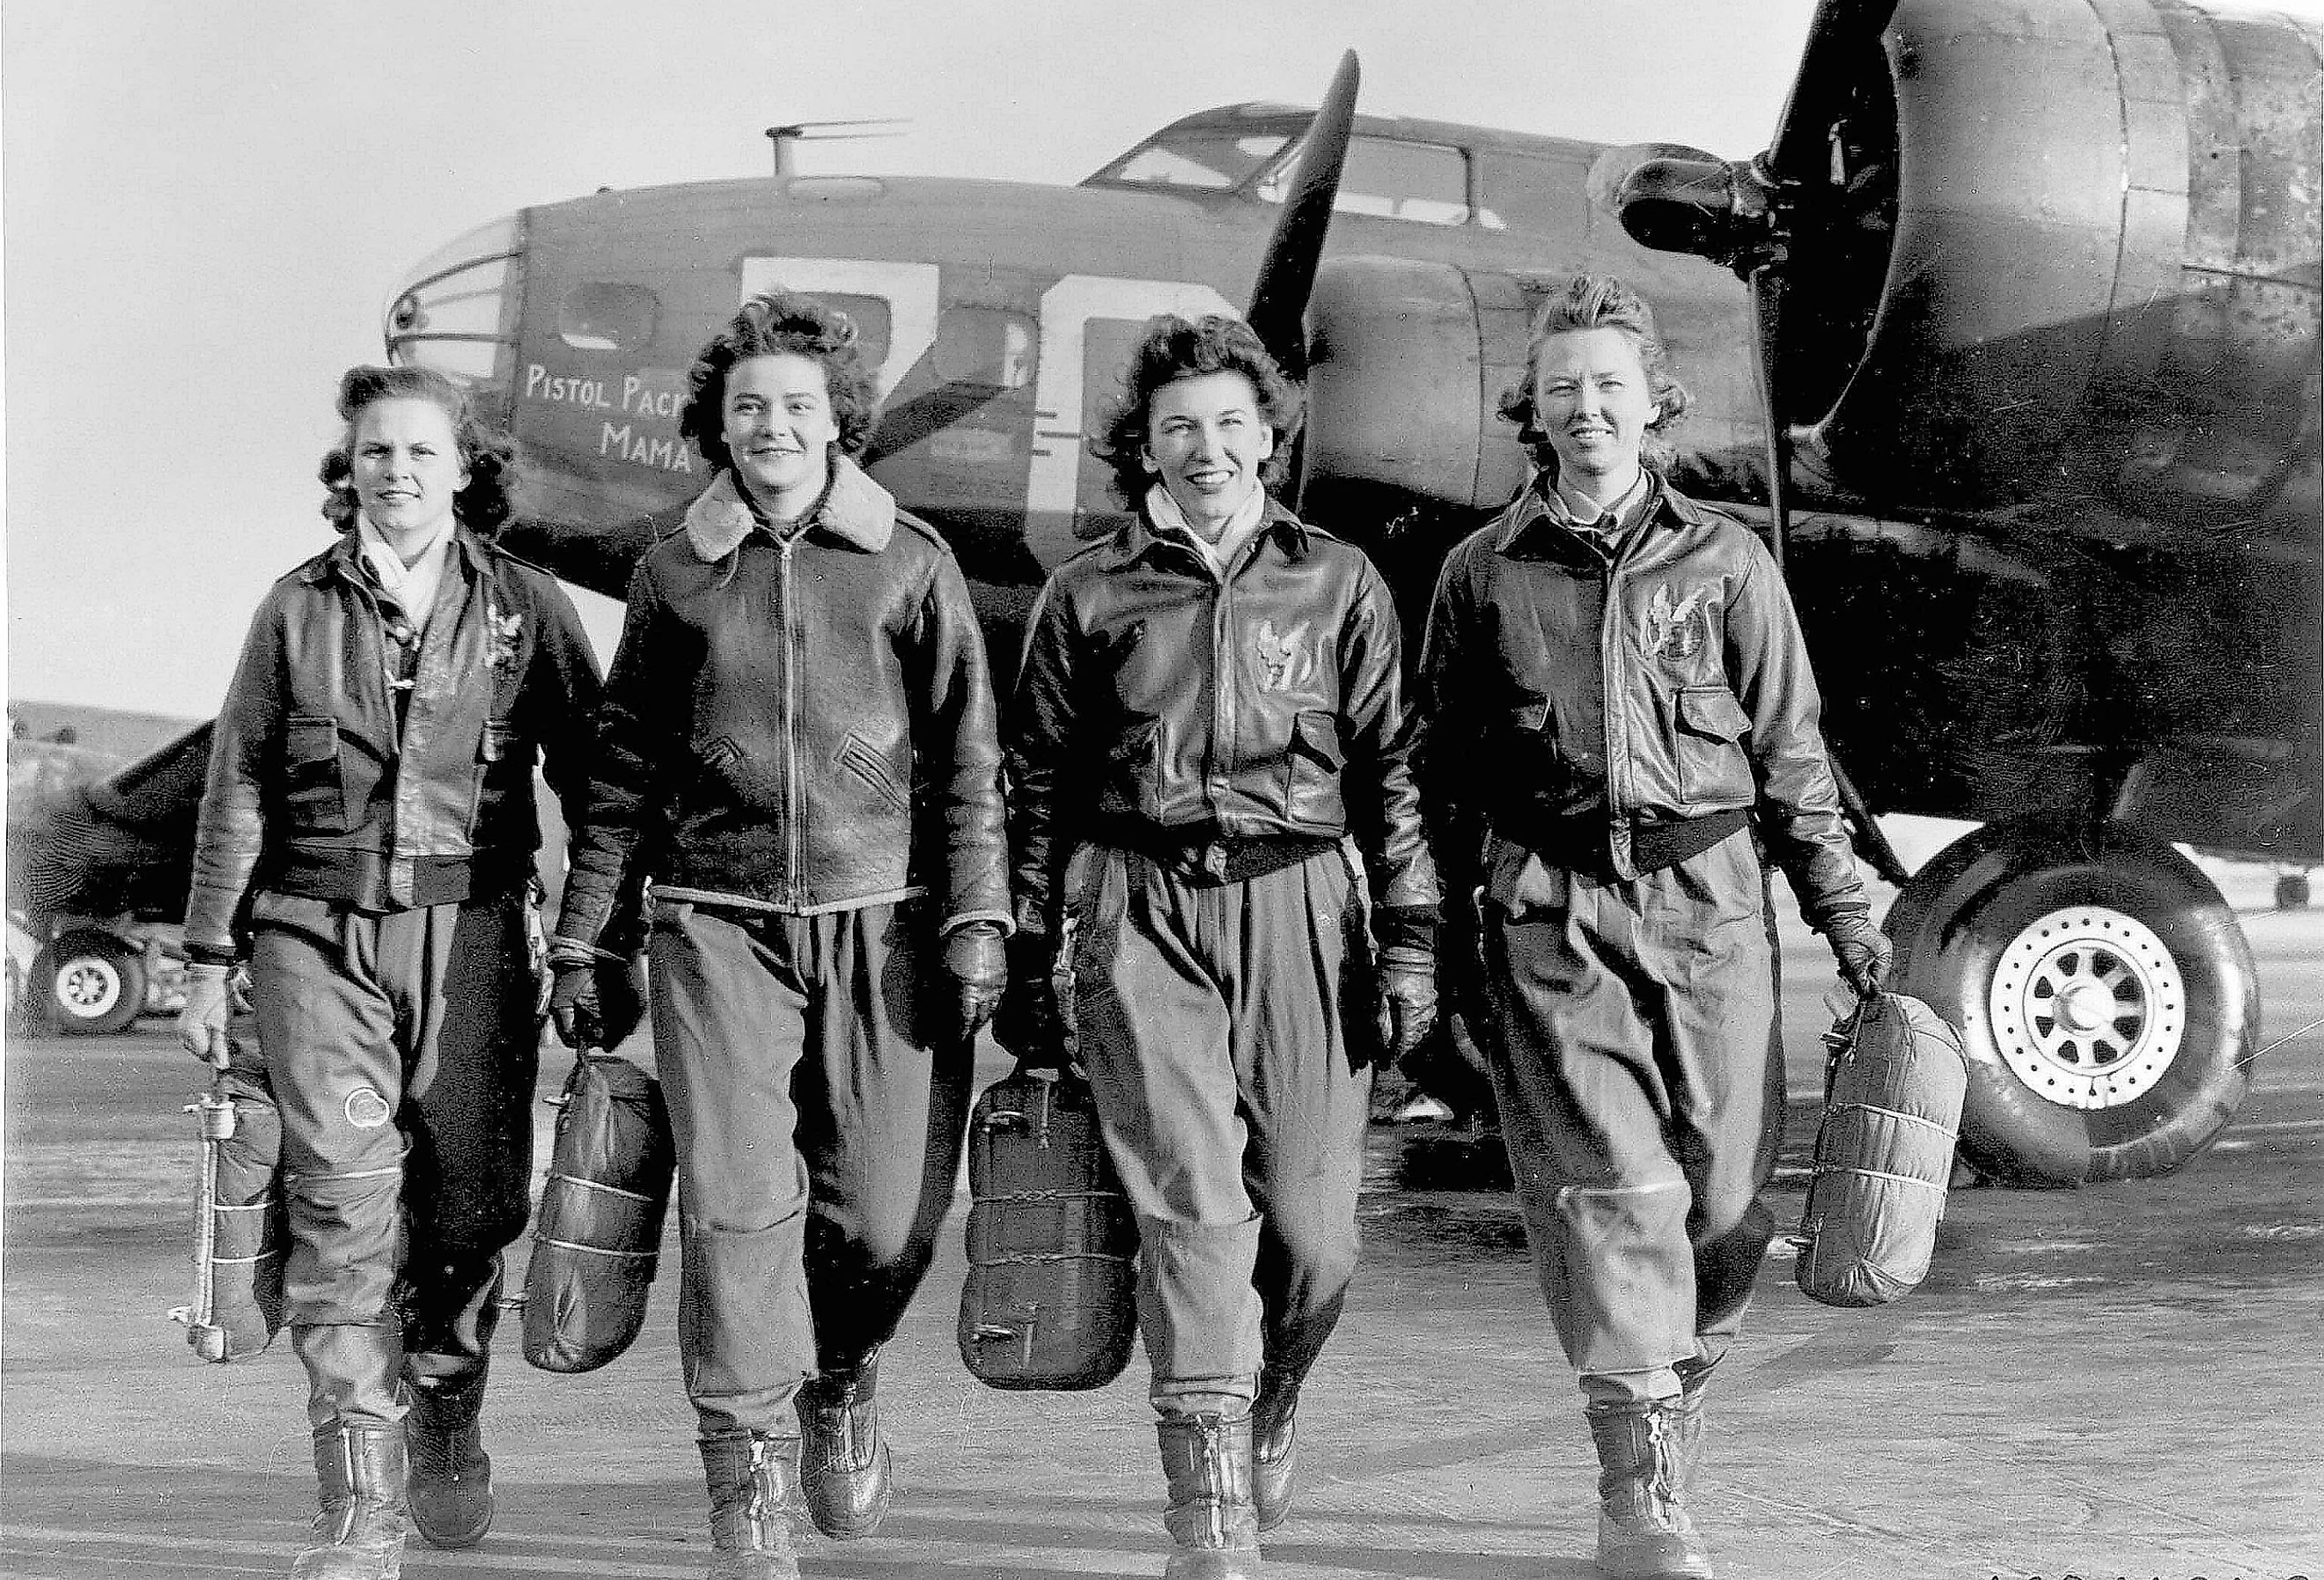 These four female pilots leaving their ship, Pistol Packin' Mama, at Lockbourne AAF, Ohio, are members (WASPS) (1944).